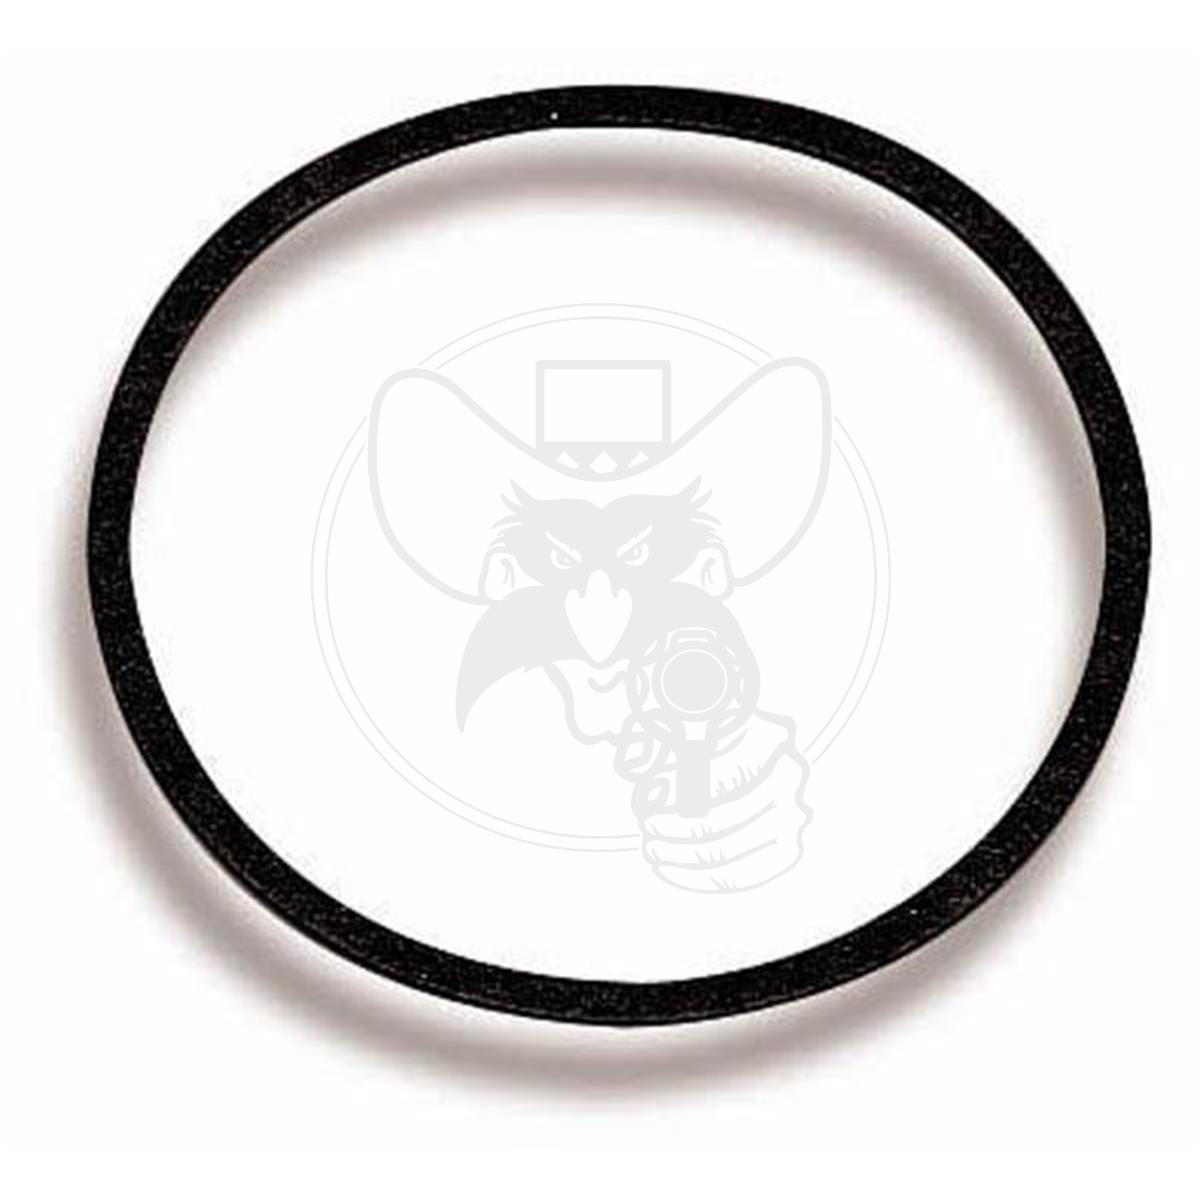 HOLLEY CARB AIR CLEANER GASKET 4500 DOMINATOR